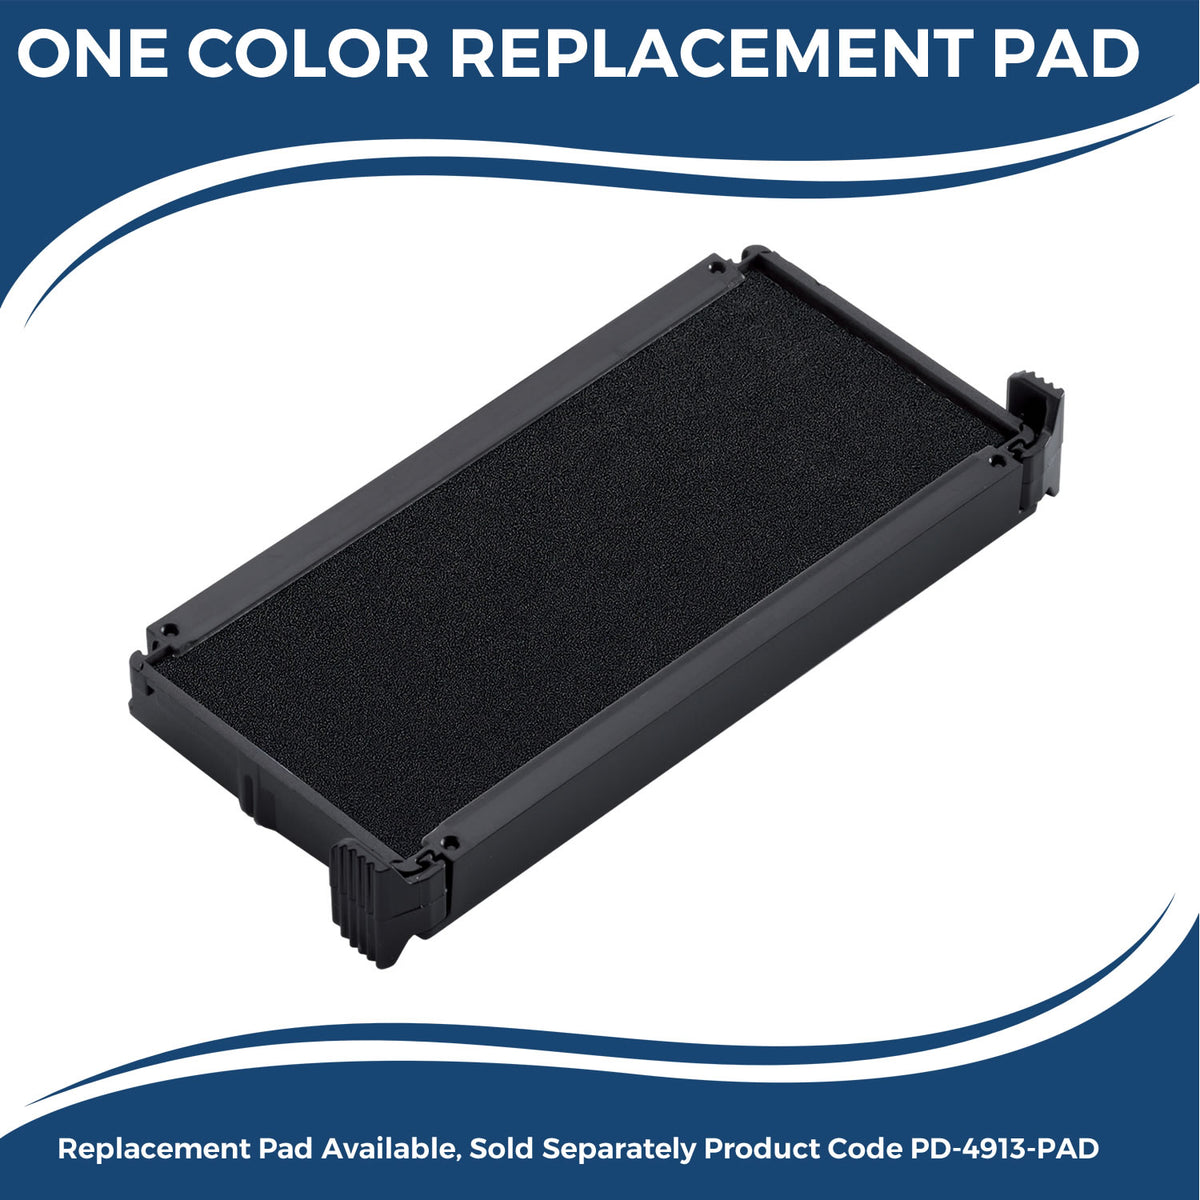 Large Self-Inking Devolver Copia Stamp 5529S Large Replacment Pad